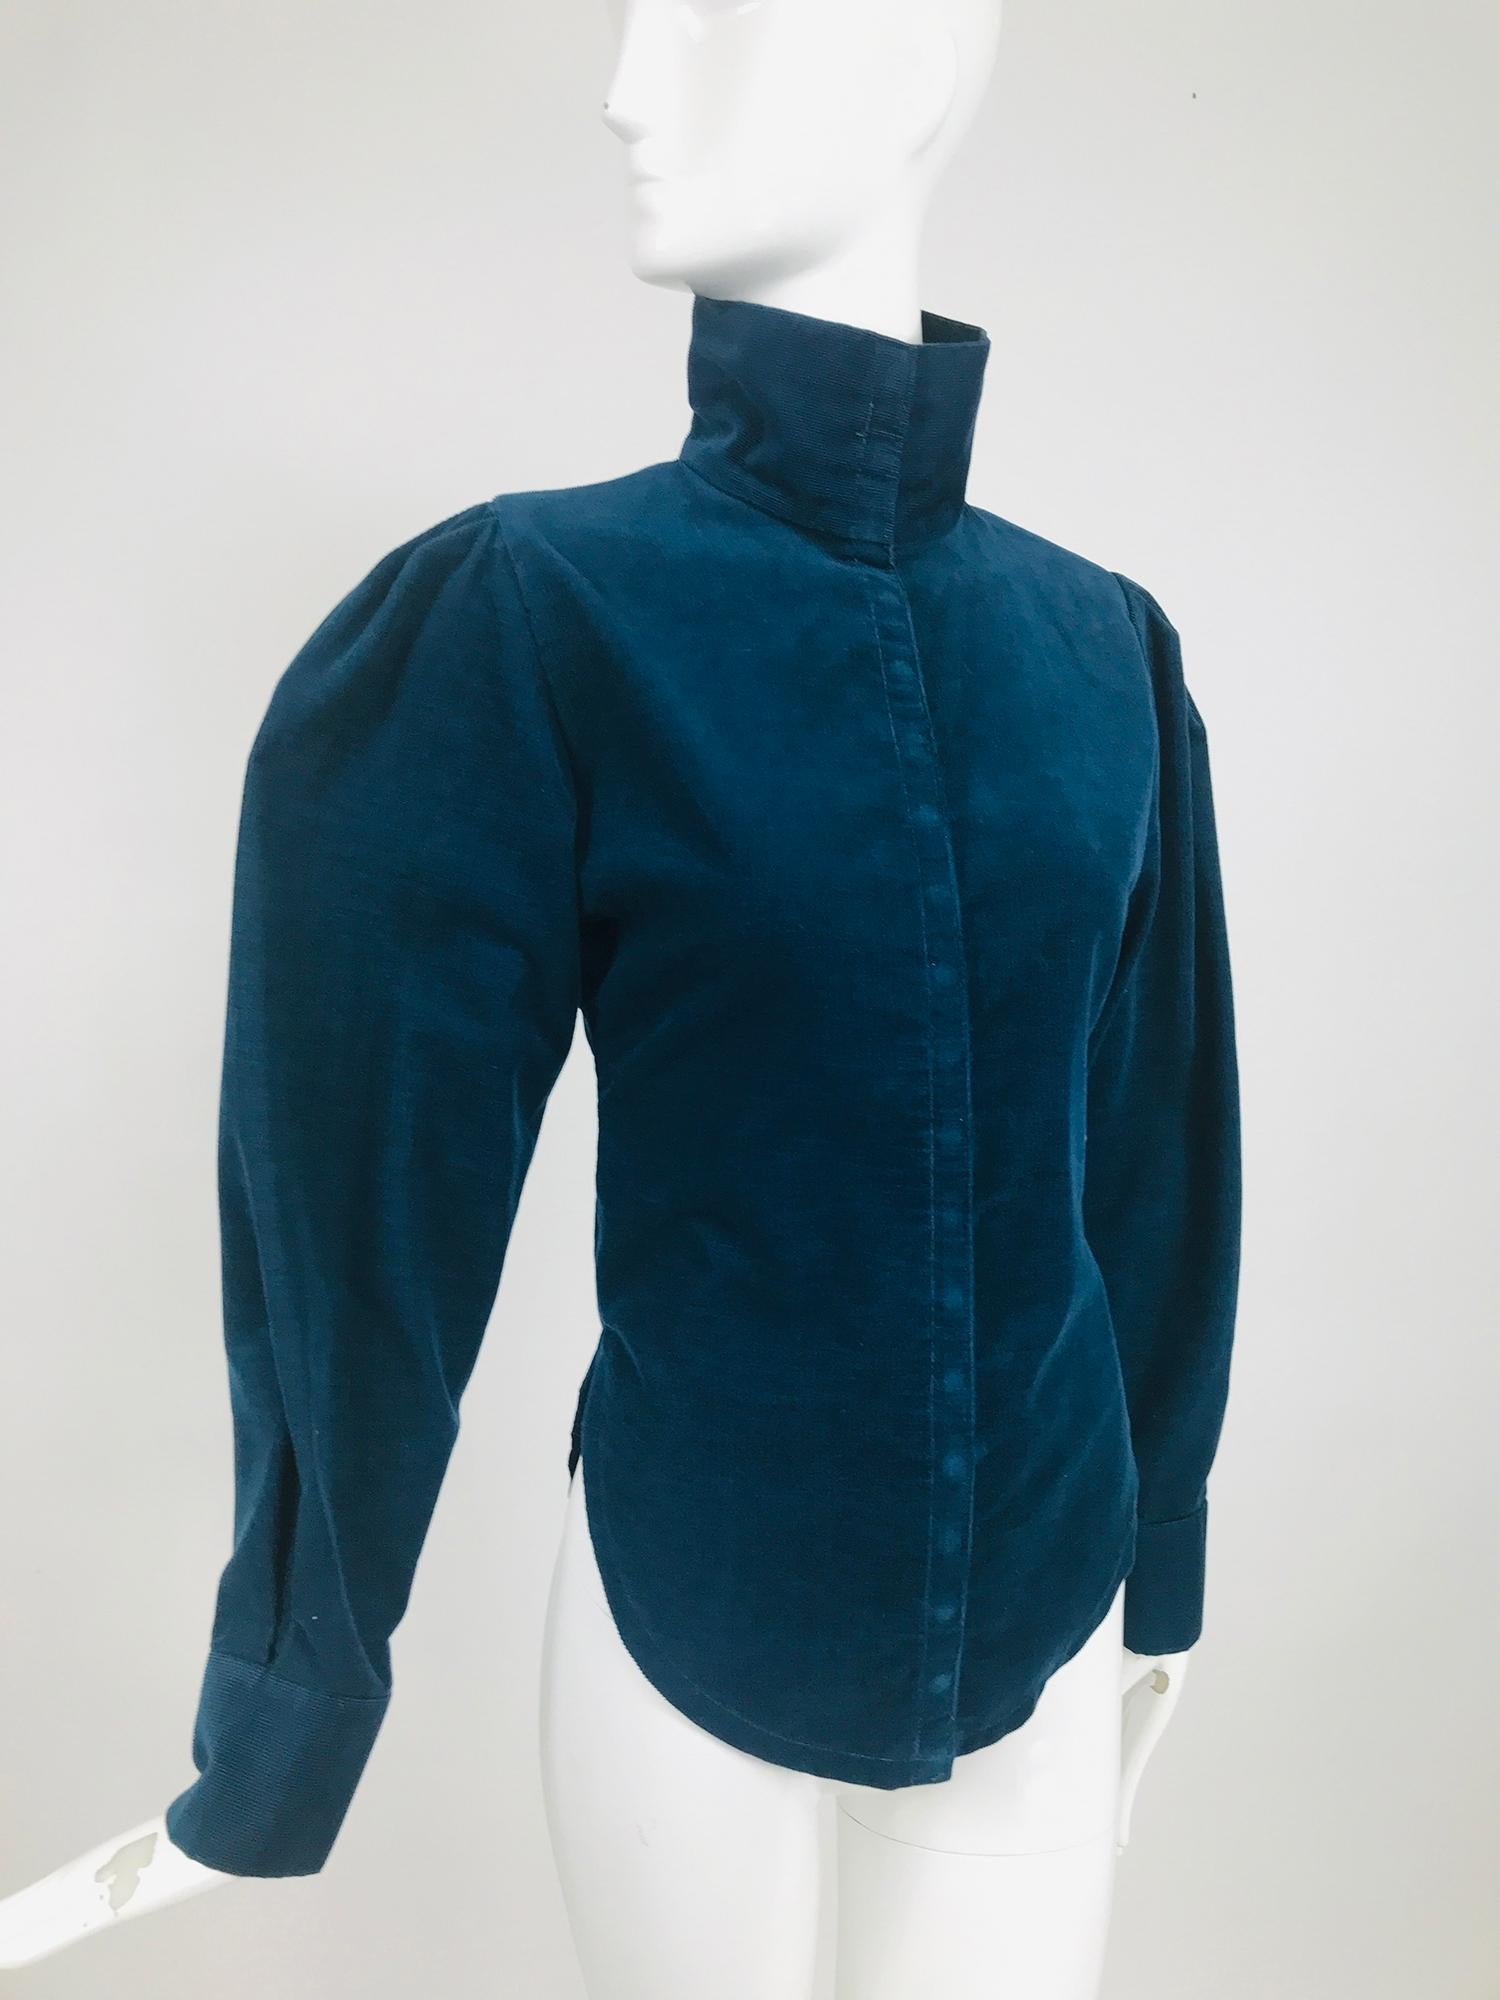 Vintage Norma Kamali teal blue corduroy, high neck fitted shirt from the 1980s. Beautiful teal blue pin wale corduroy fitted shirt, high neckline, leg O mutton sleeves, narrow torso and shirt tail hem. A modern take on a Victorian blouse. The top